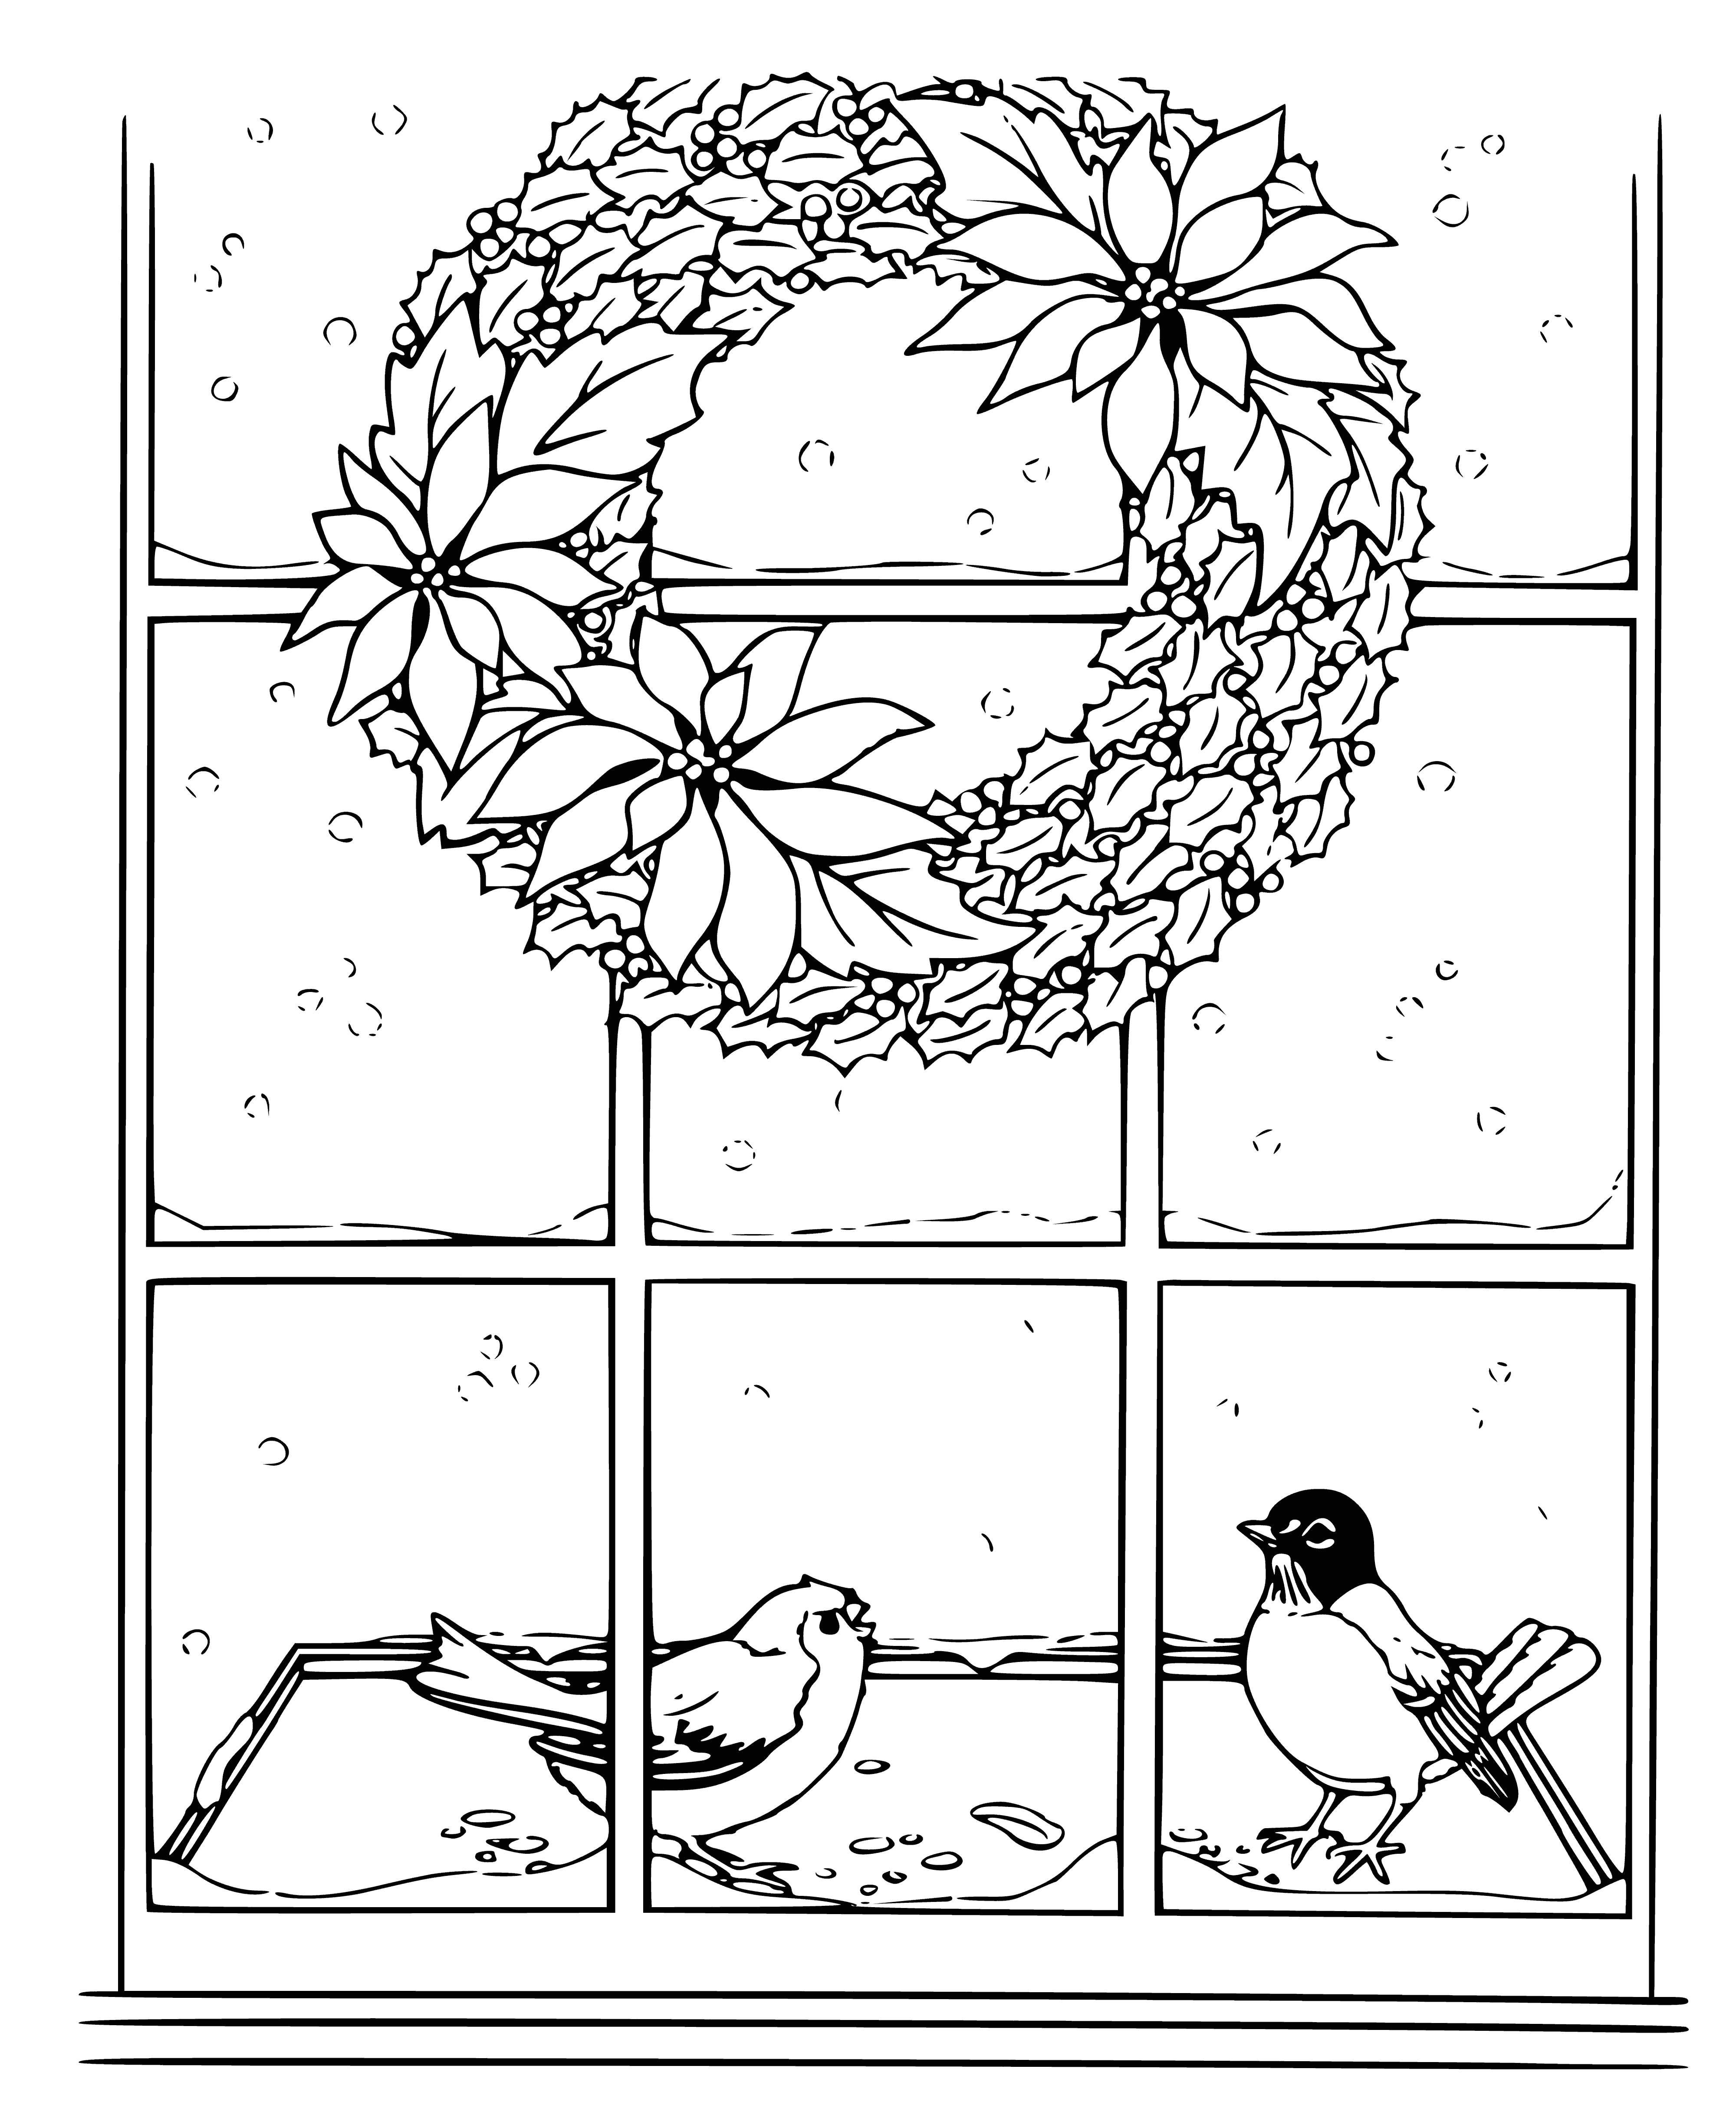 coloring page: 5 birds outside: 3 brown standing, 2 white flying in air; a green forest in background.